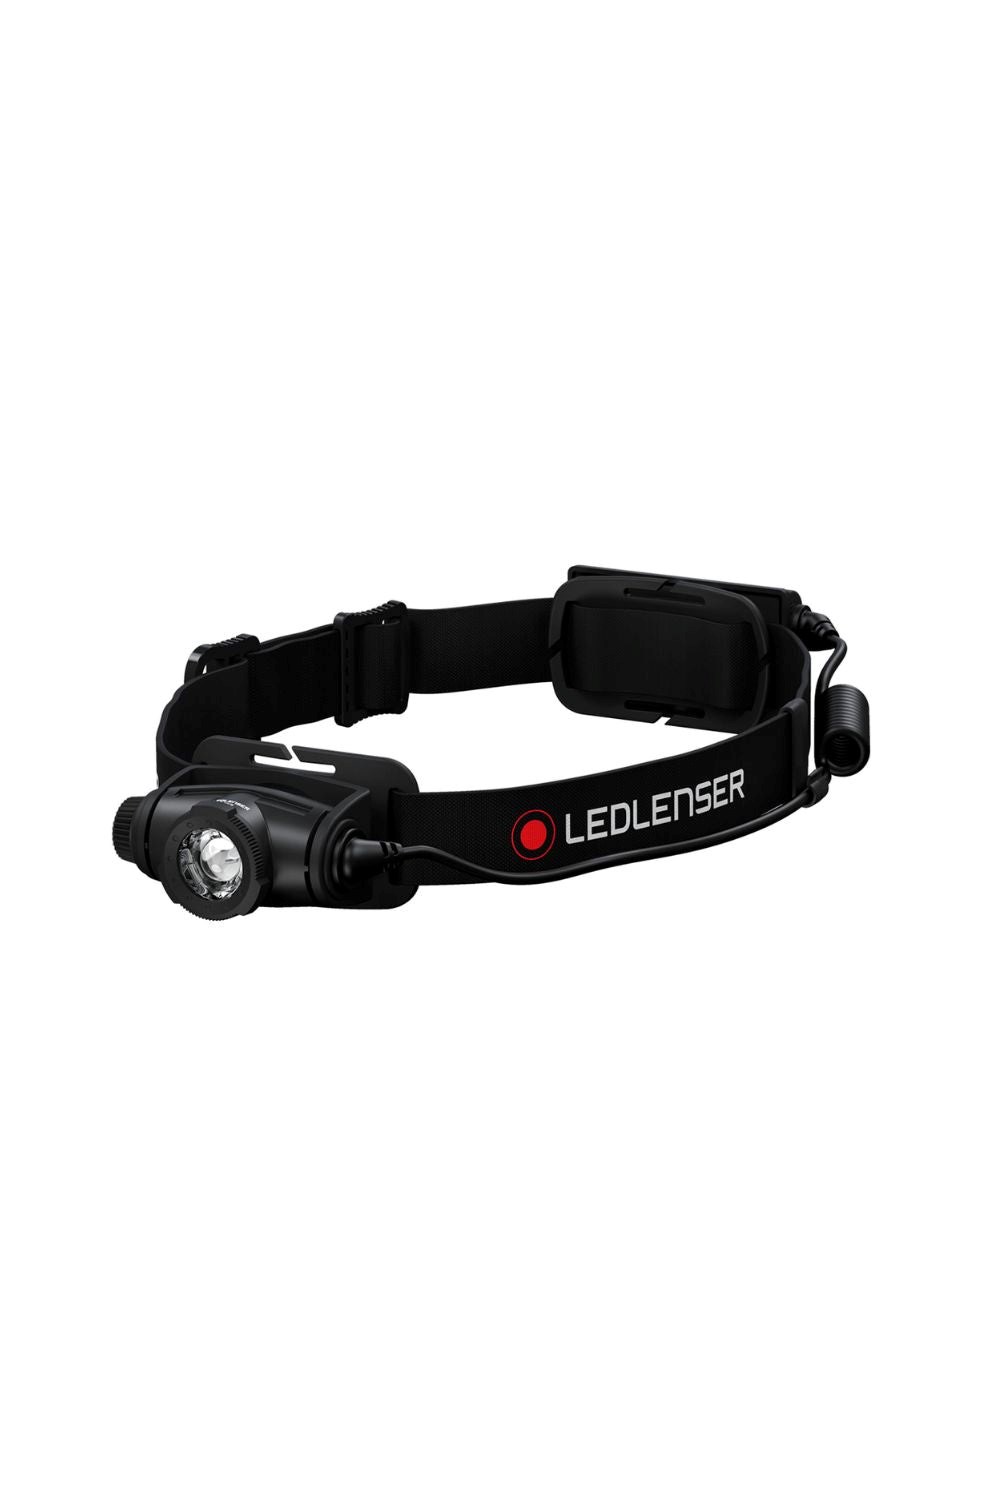 H5R Core Rechargeable LED Head Torch -